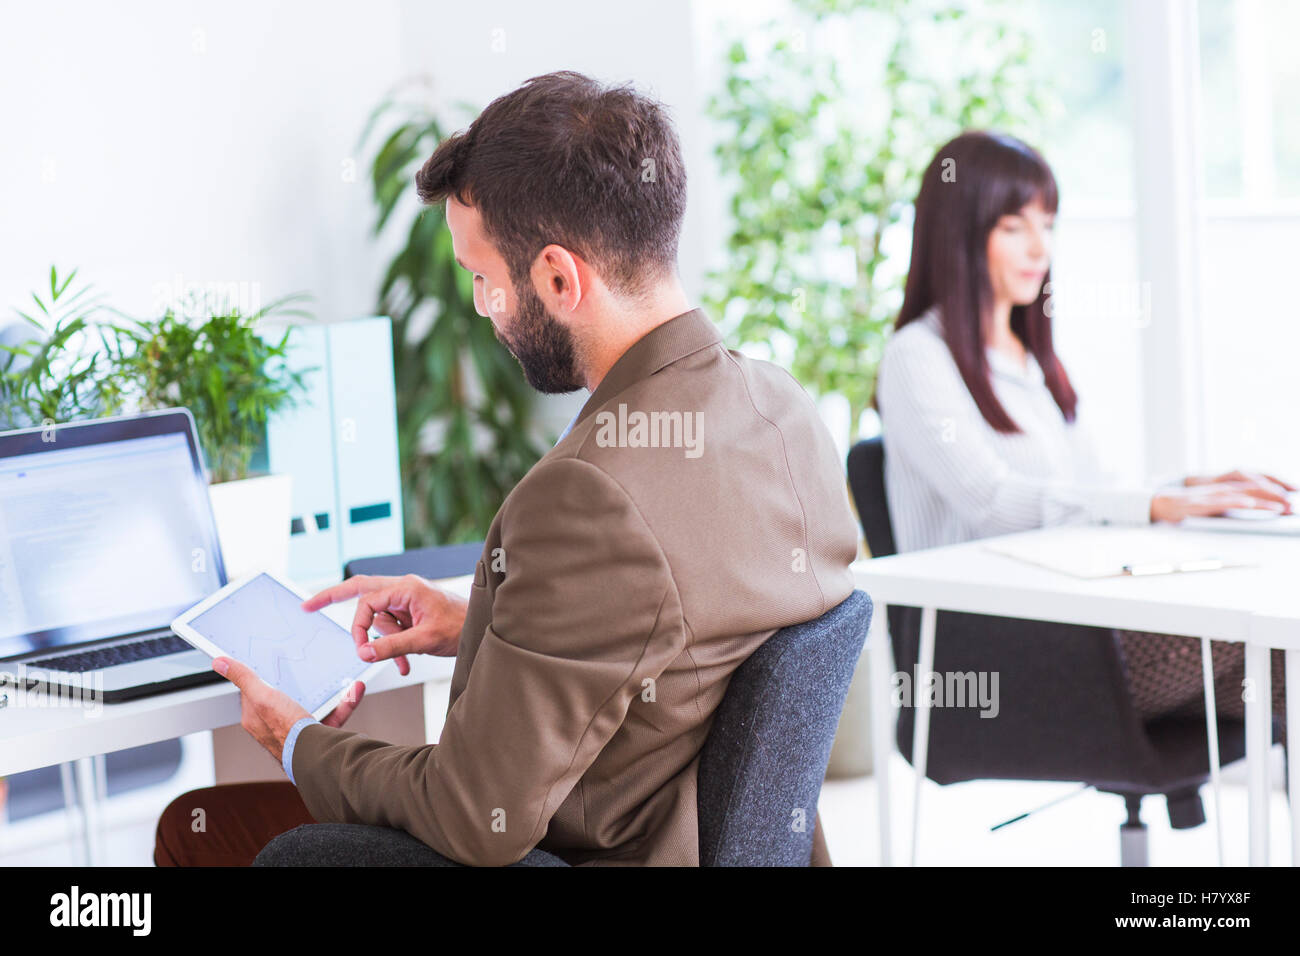 Man working in office Stock Photo